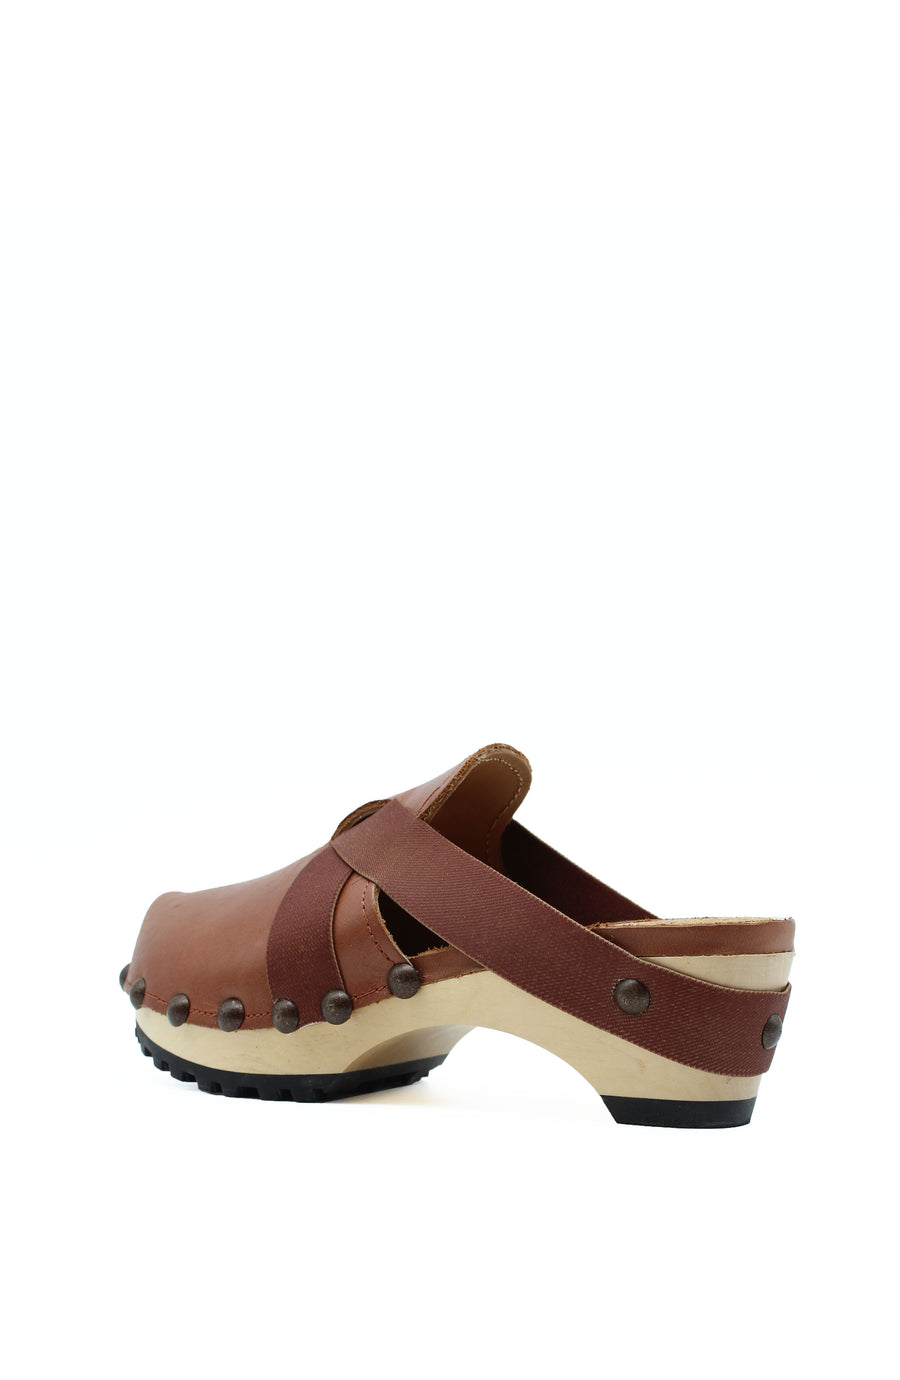 CLEARANCE - BEATRICE in BROWN